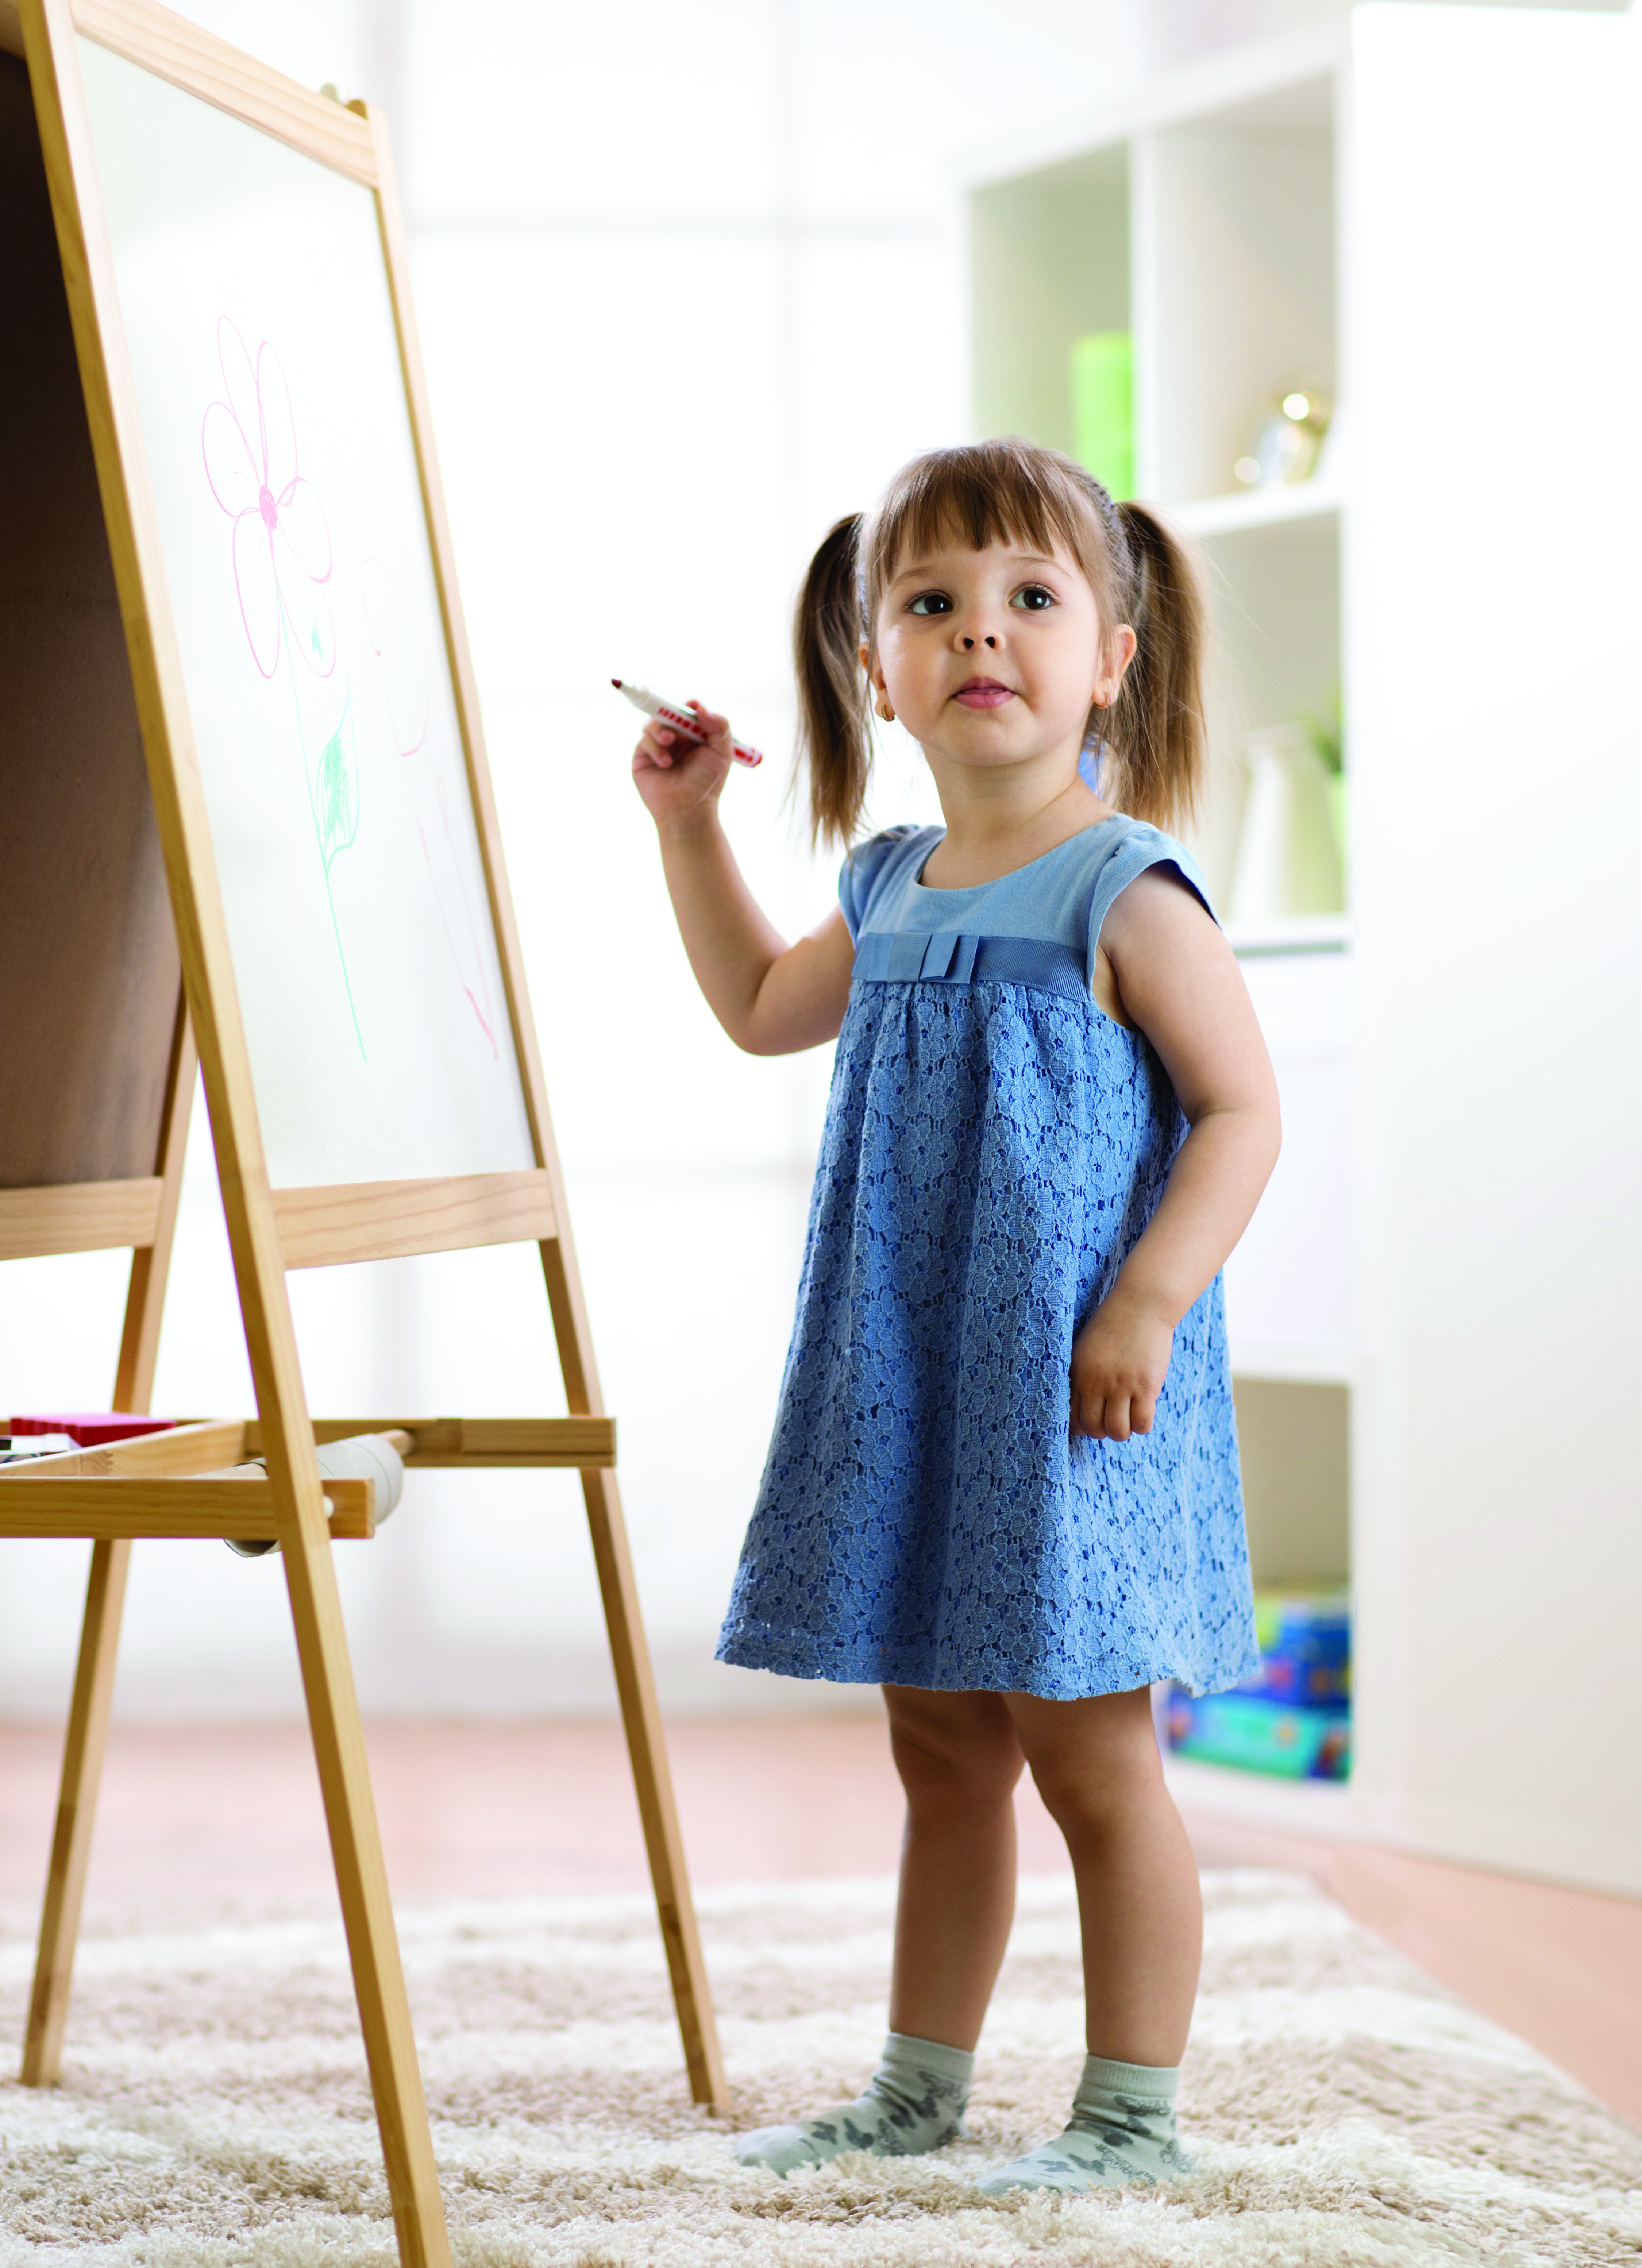 young child holding a marker standing beside an easel with a picture of a flower drawn on it